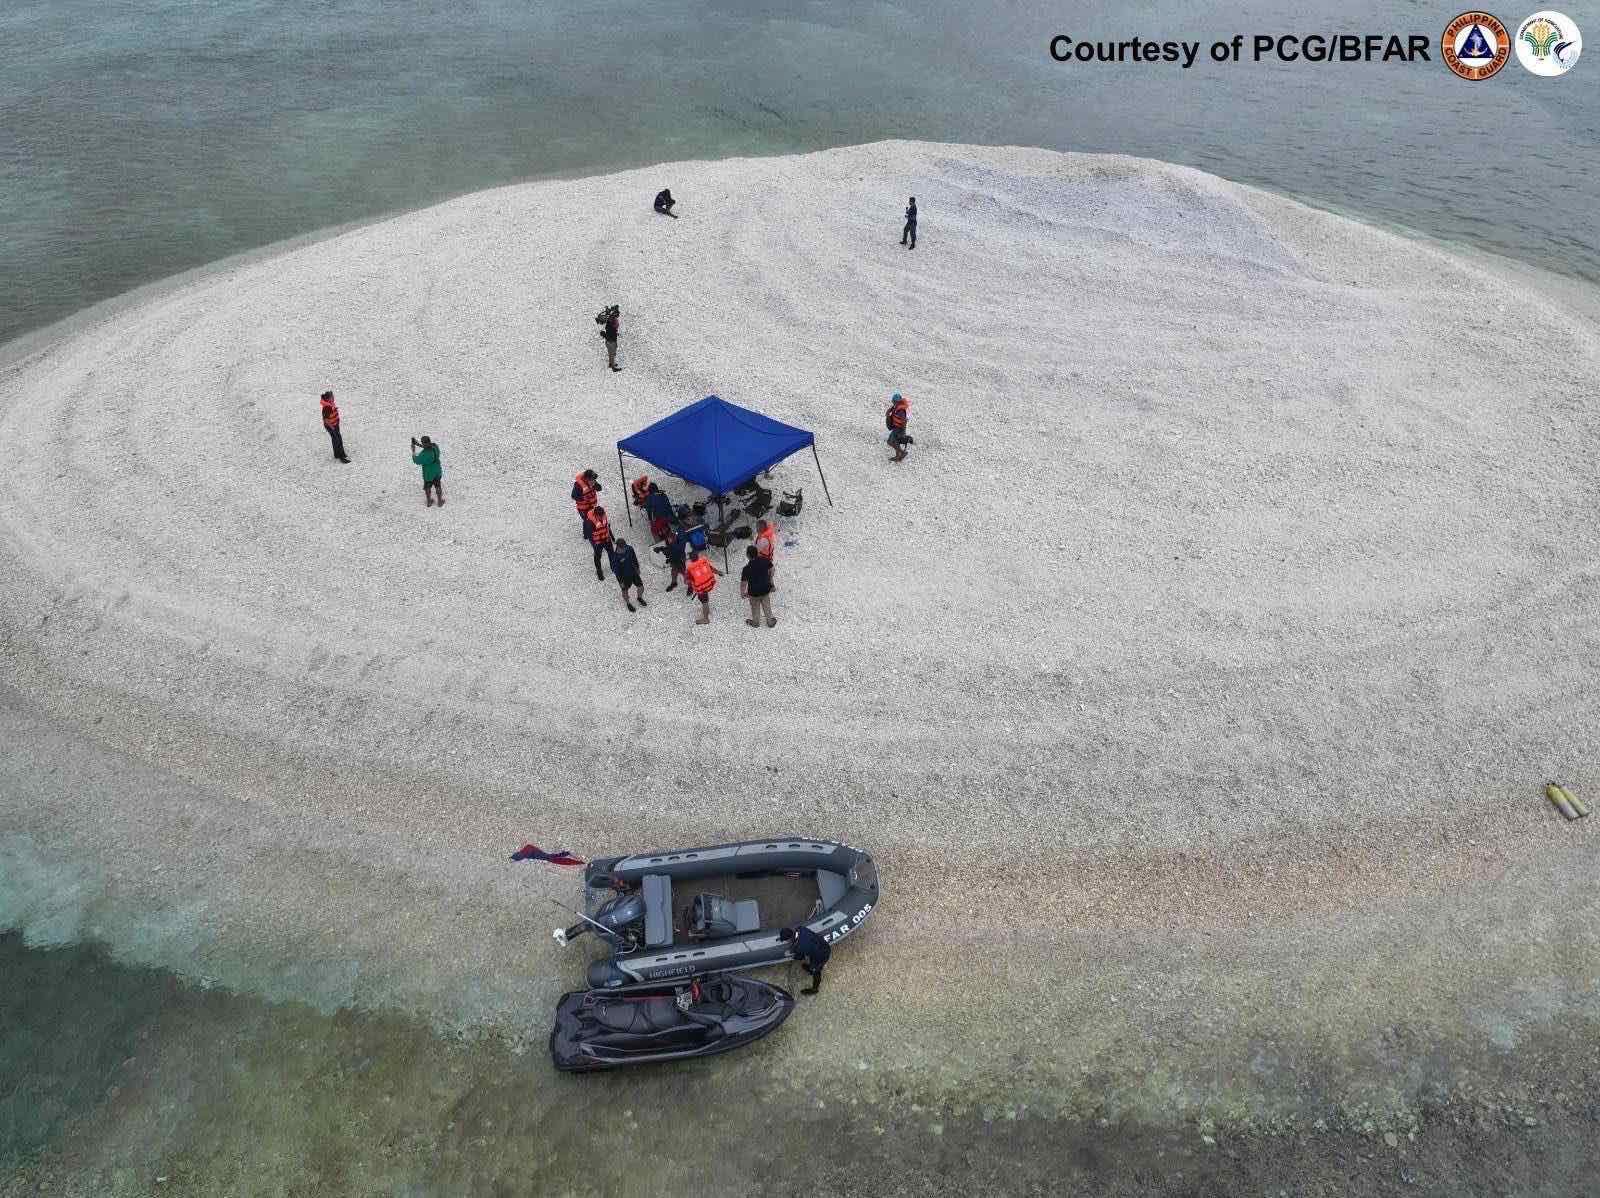 IN PHOTOS: Philippine scientists assess coral reef near Pag-asa Island